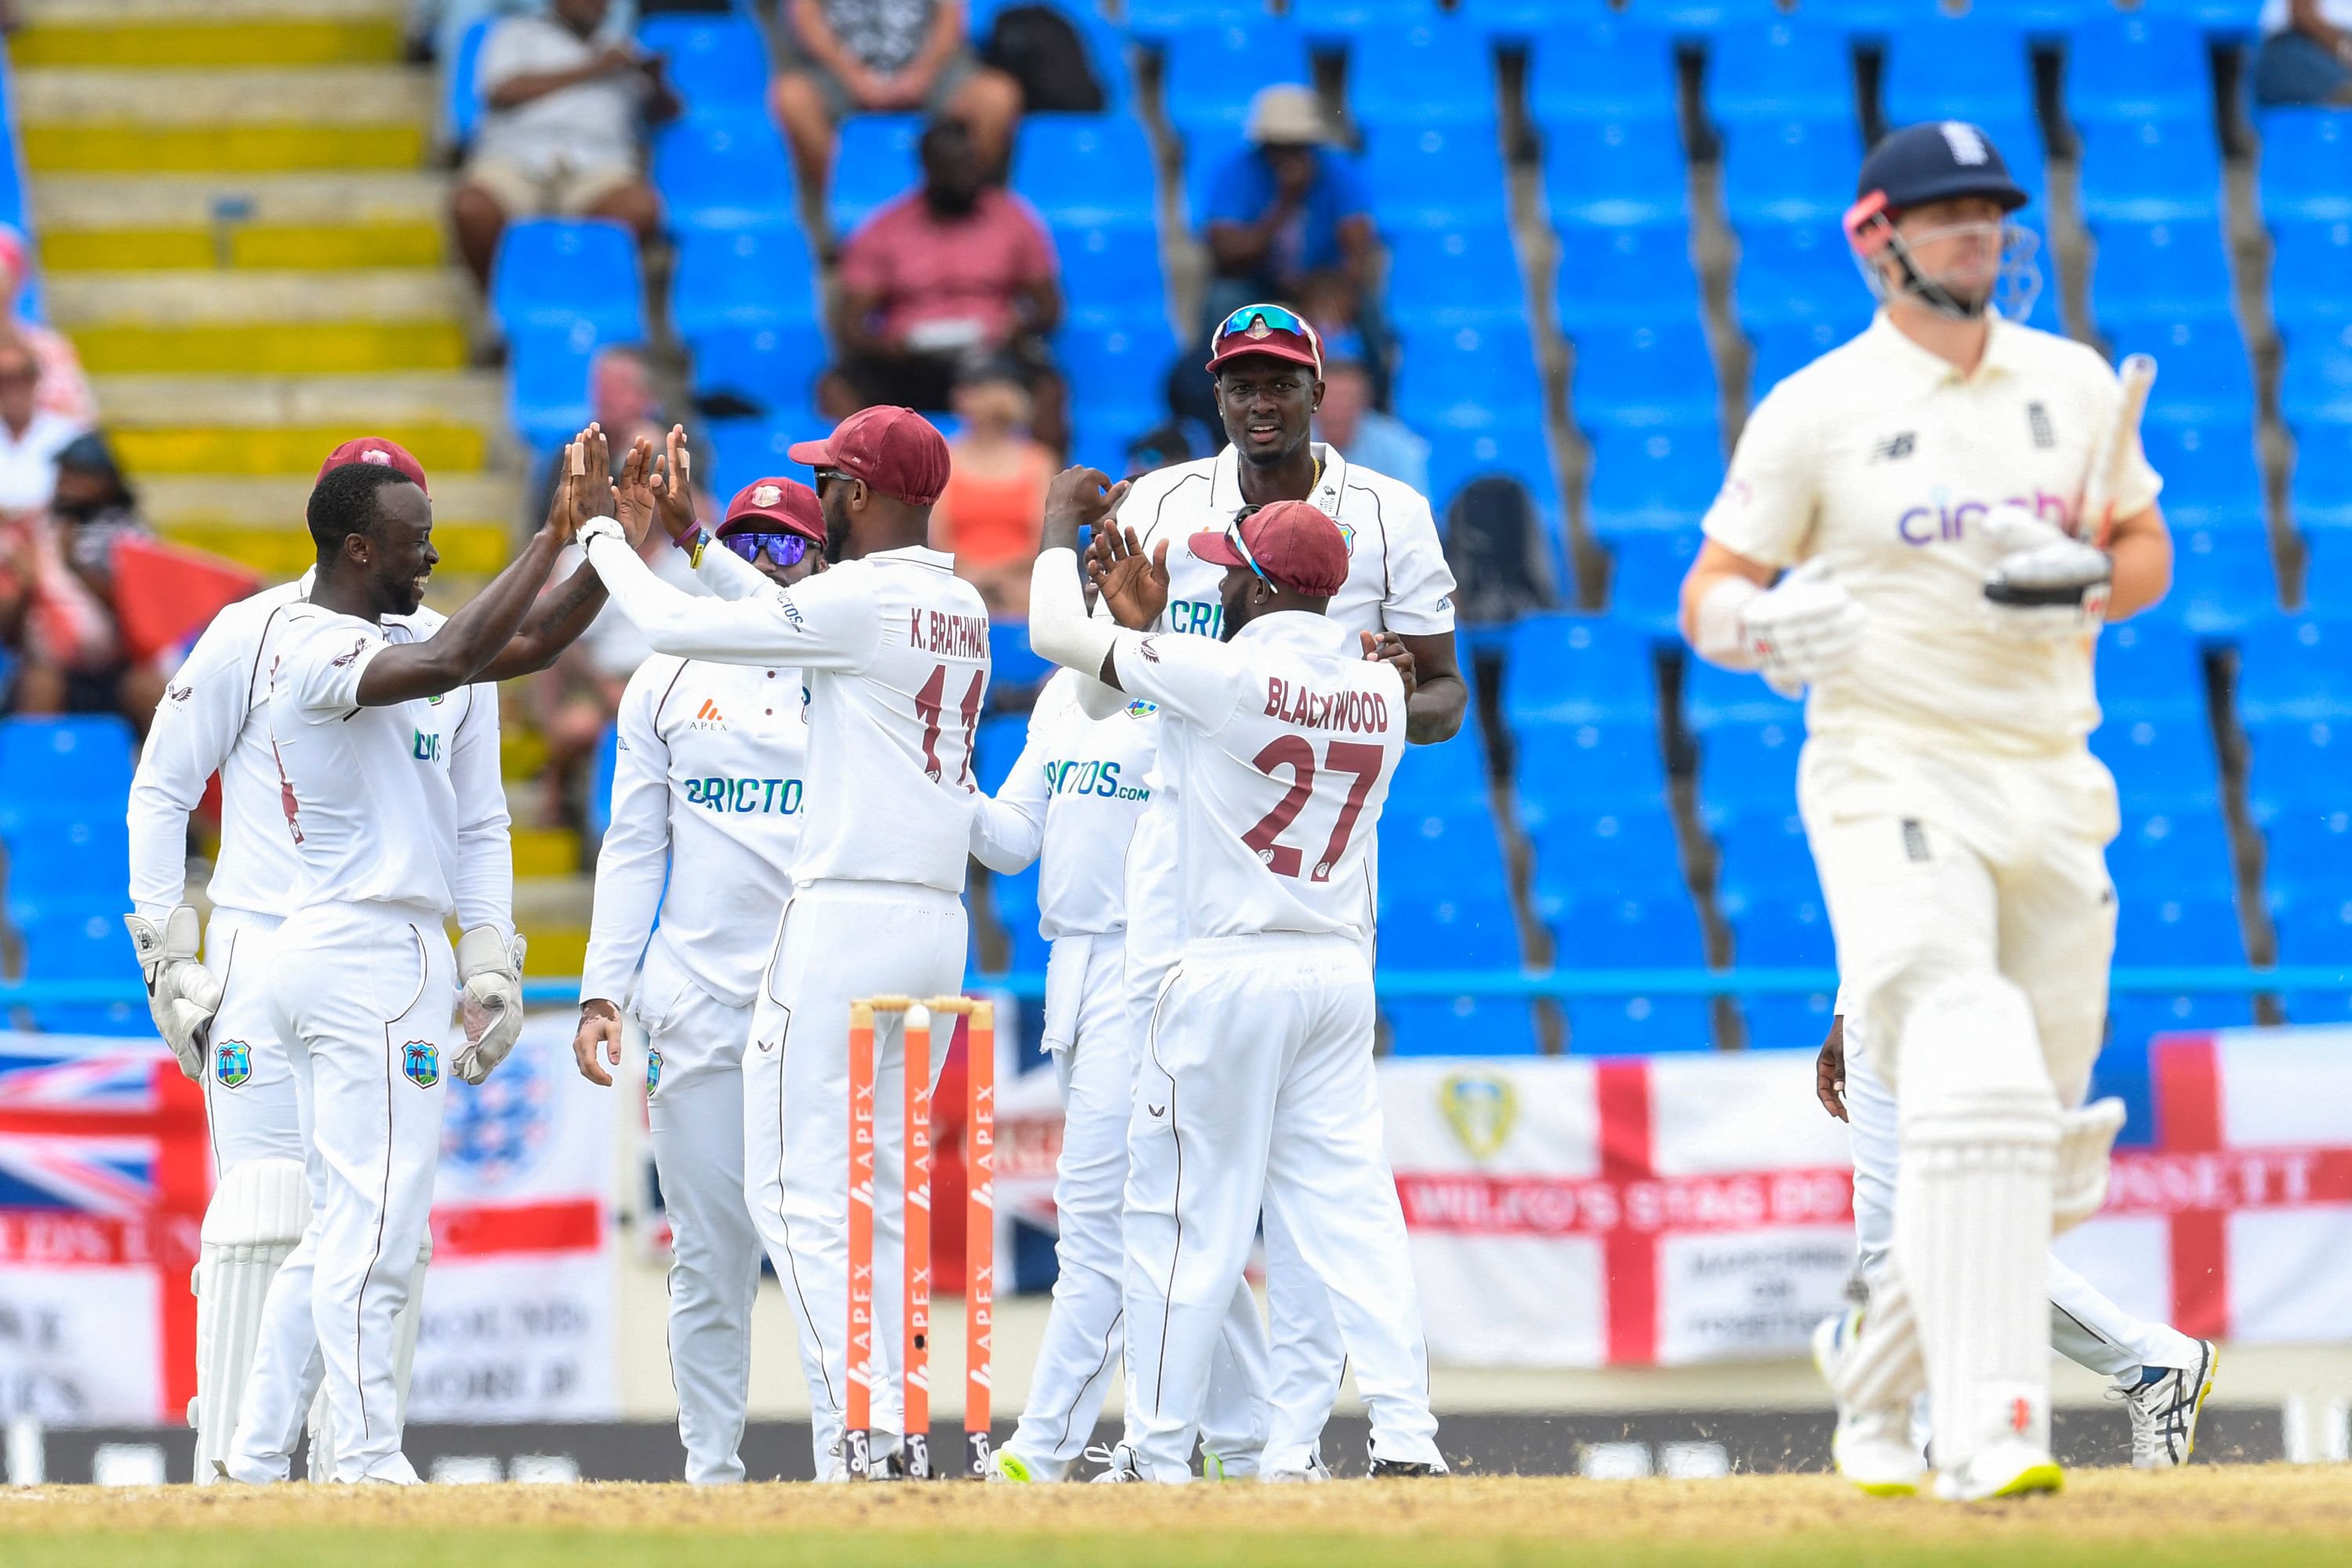 WI vs BAN LIVE: West Indies banks on LEGEND Kemar Roach to deliver again as they name UNCHANGED squad for second Test against Bangladesh